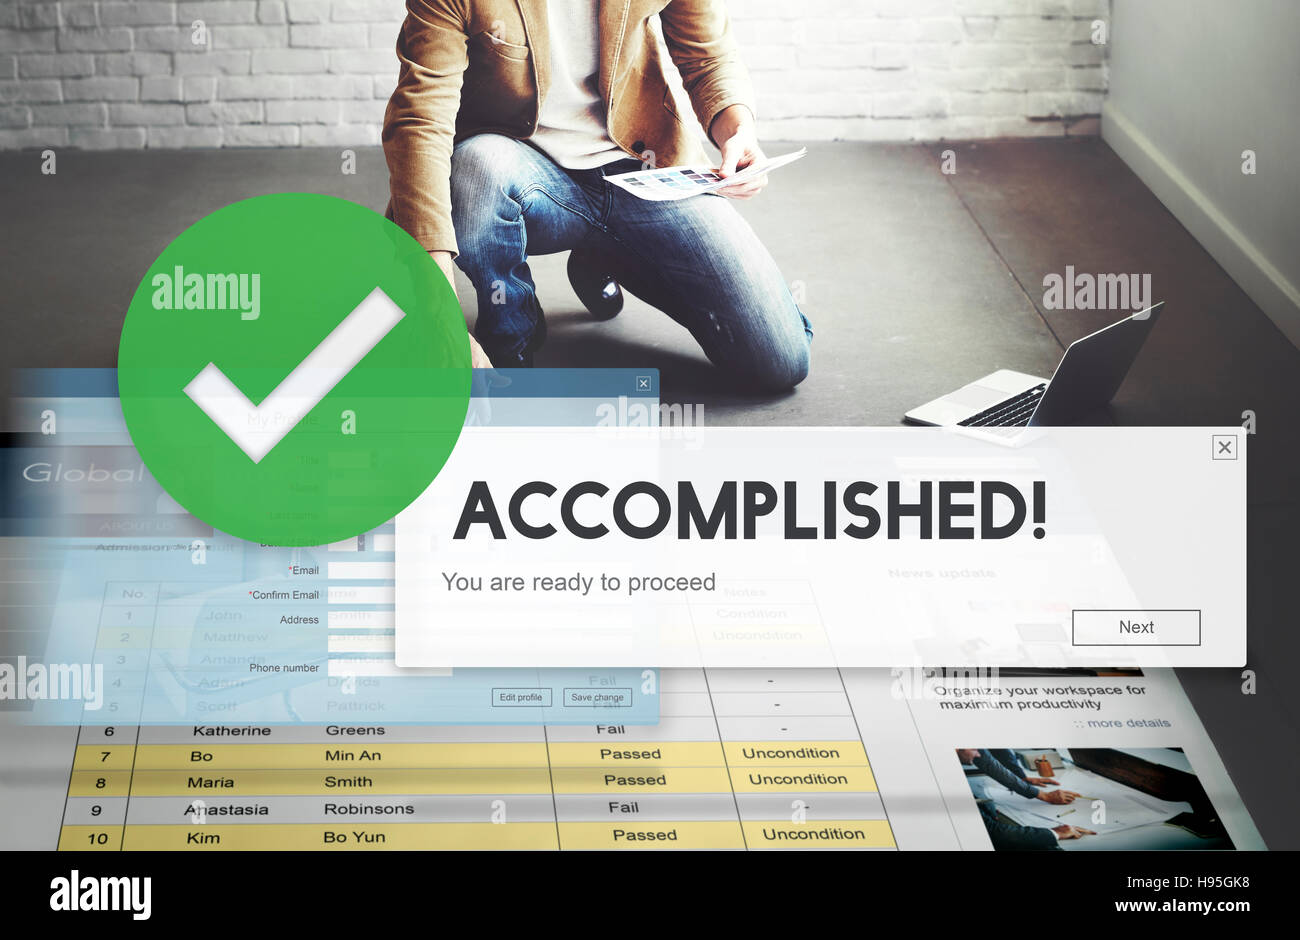 Accomplished Achieved Approve Completed Concept Stock Photo